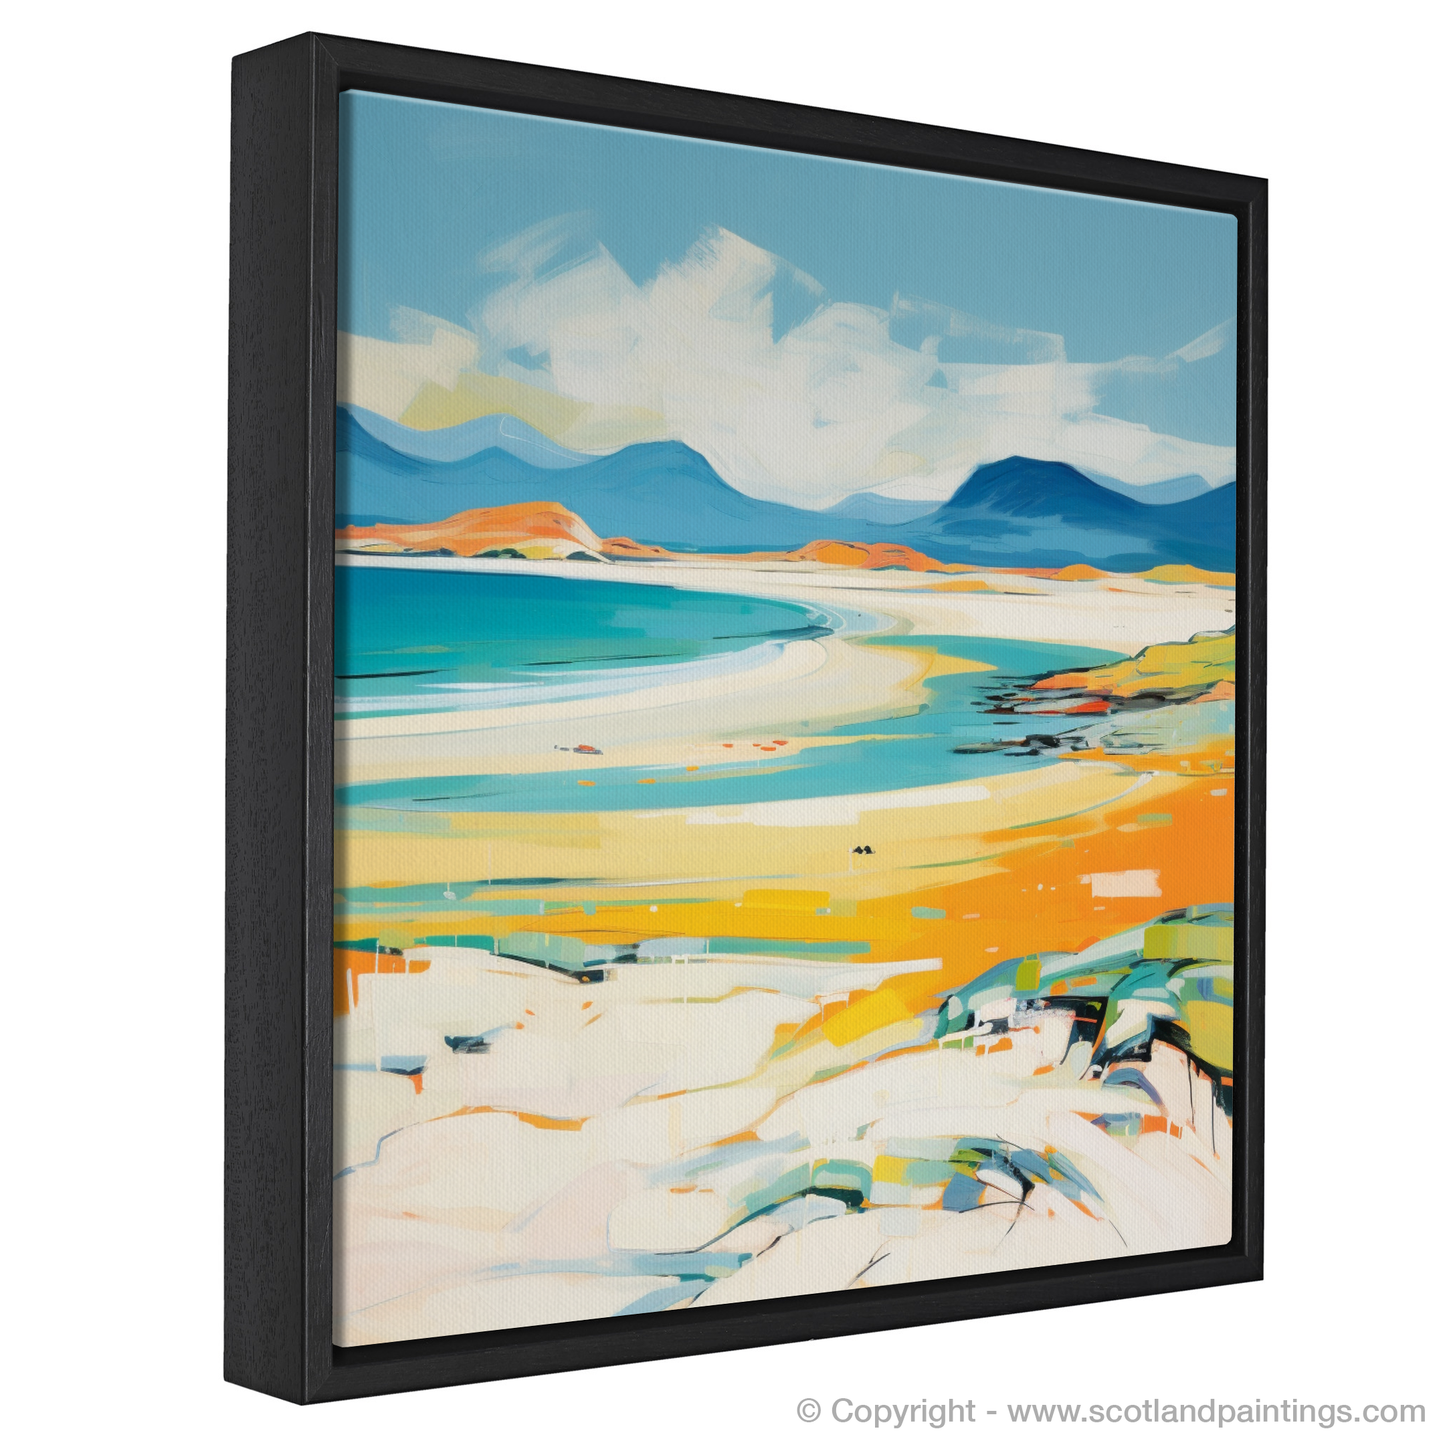 Painting and Art Print of Luskentyre Beach, Isle of Harris entitled "Luskentyre Beach Abstract: A Symphony of Colour and Form".